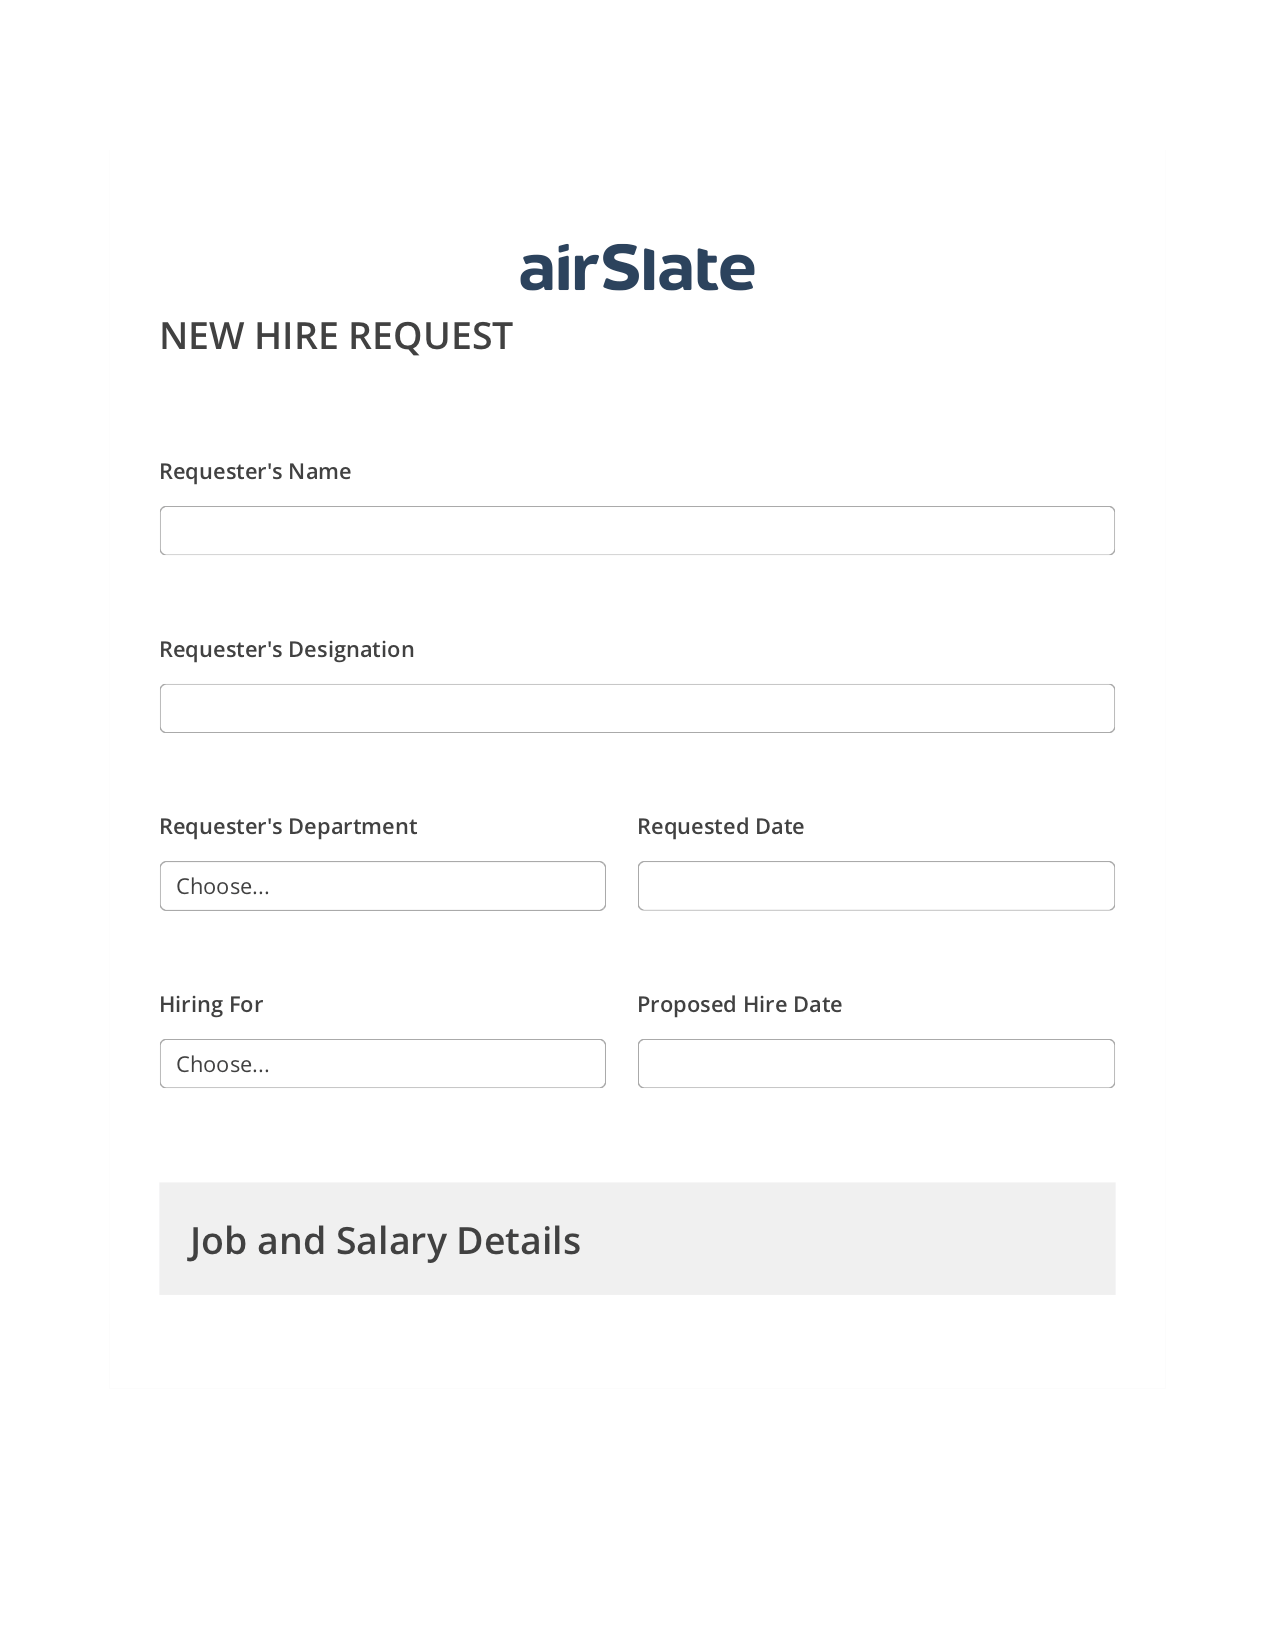 Hiring Request Workflow Pre-fill from Excel Spreadsheet Bot, Slack Notification Bot, Archive to OneDrive Bot